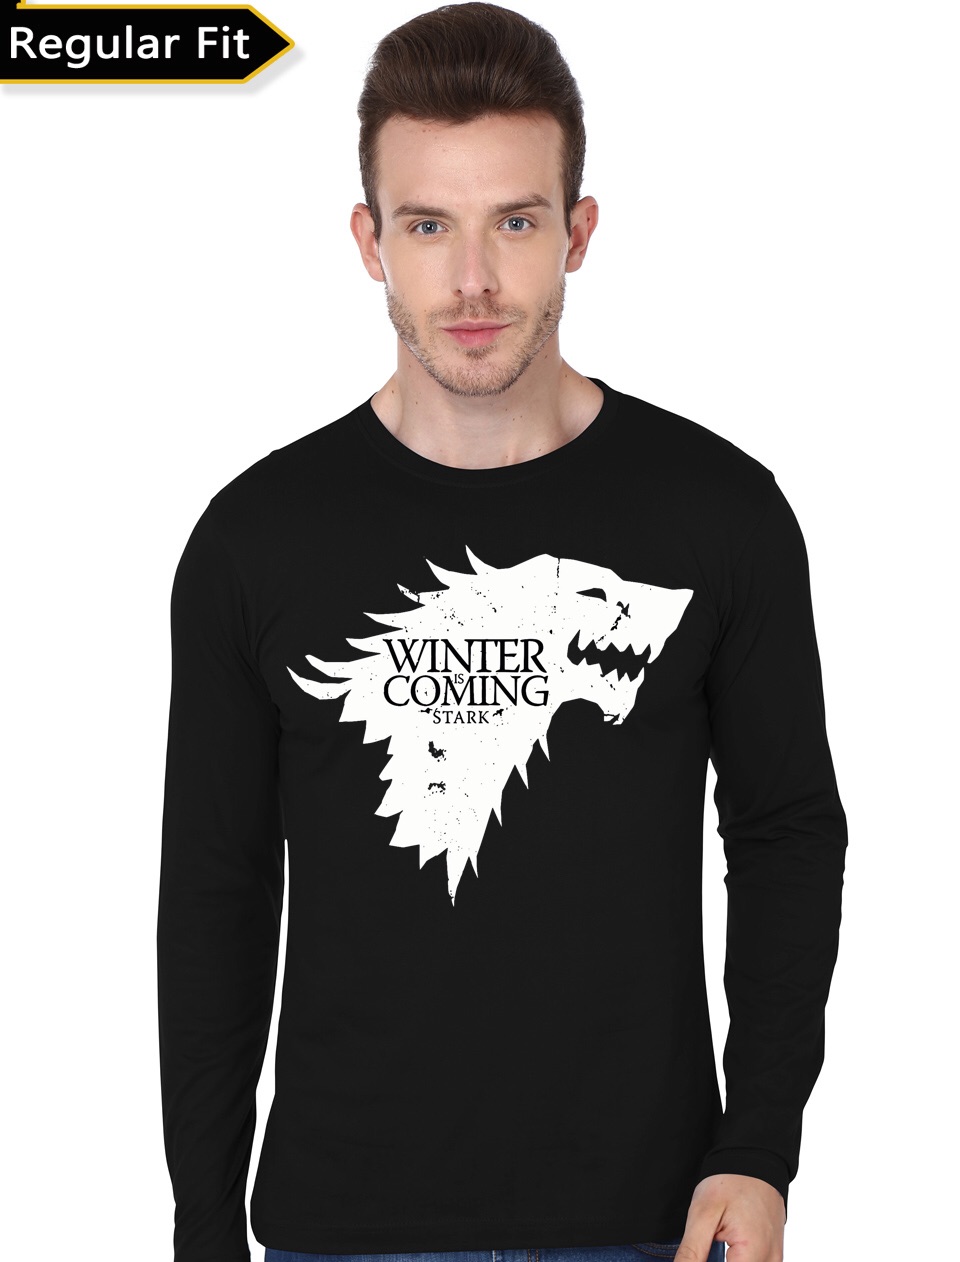 game of thrones t shirts india